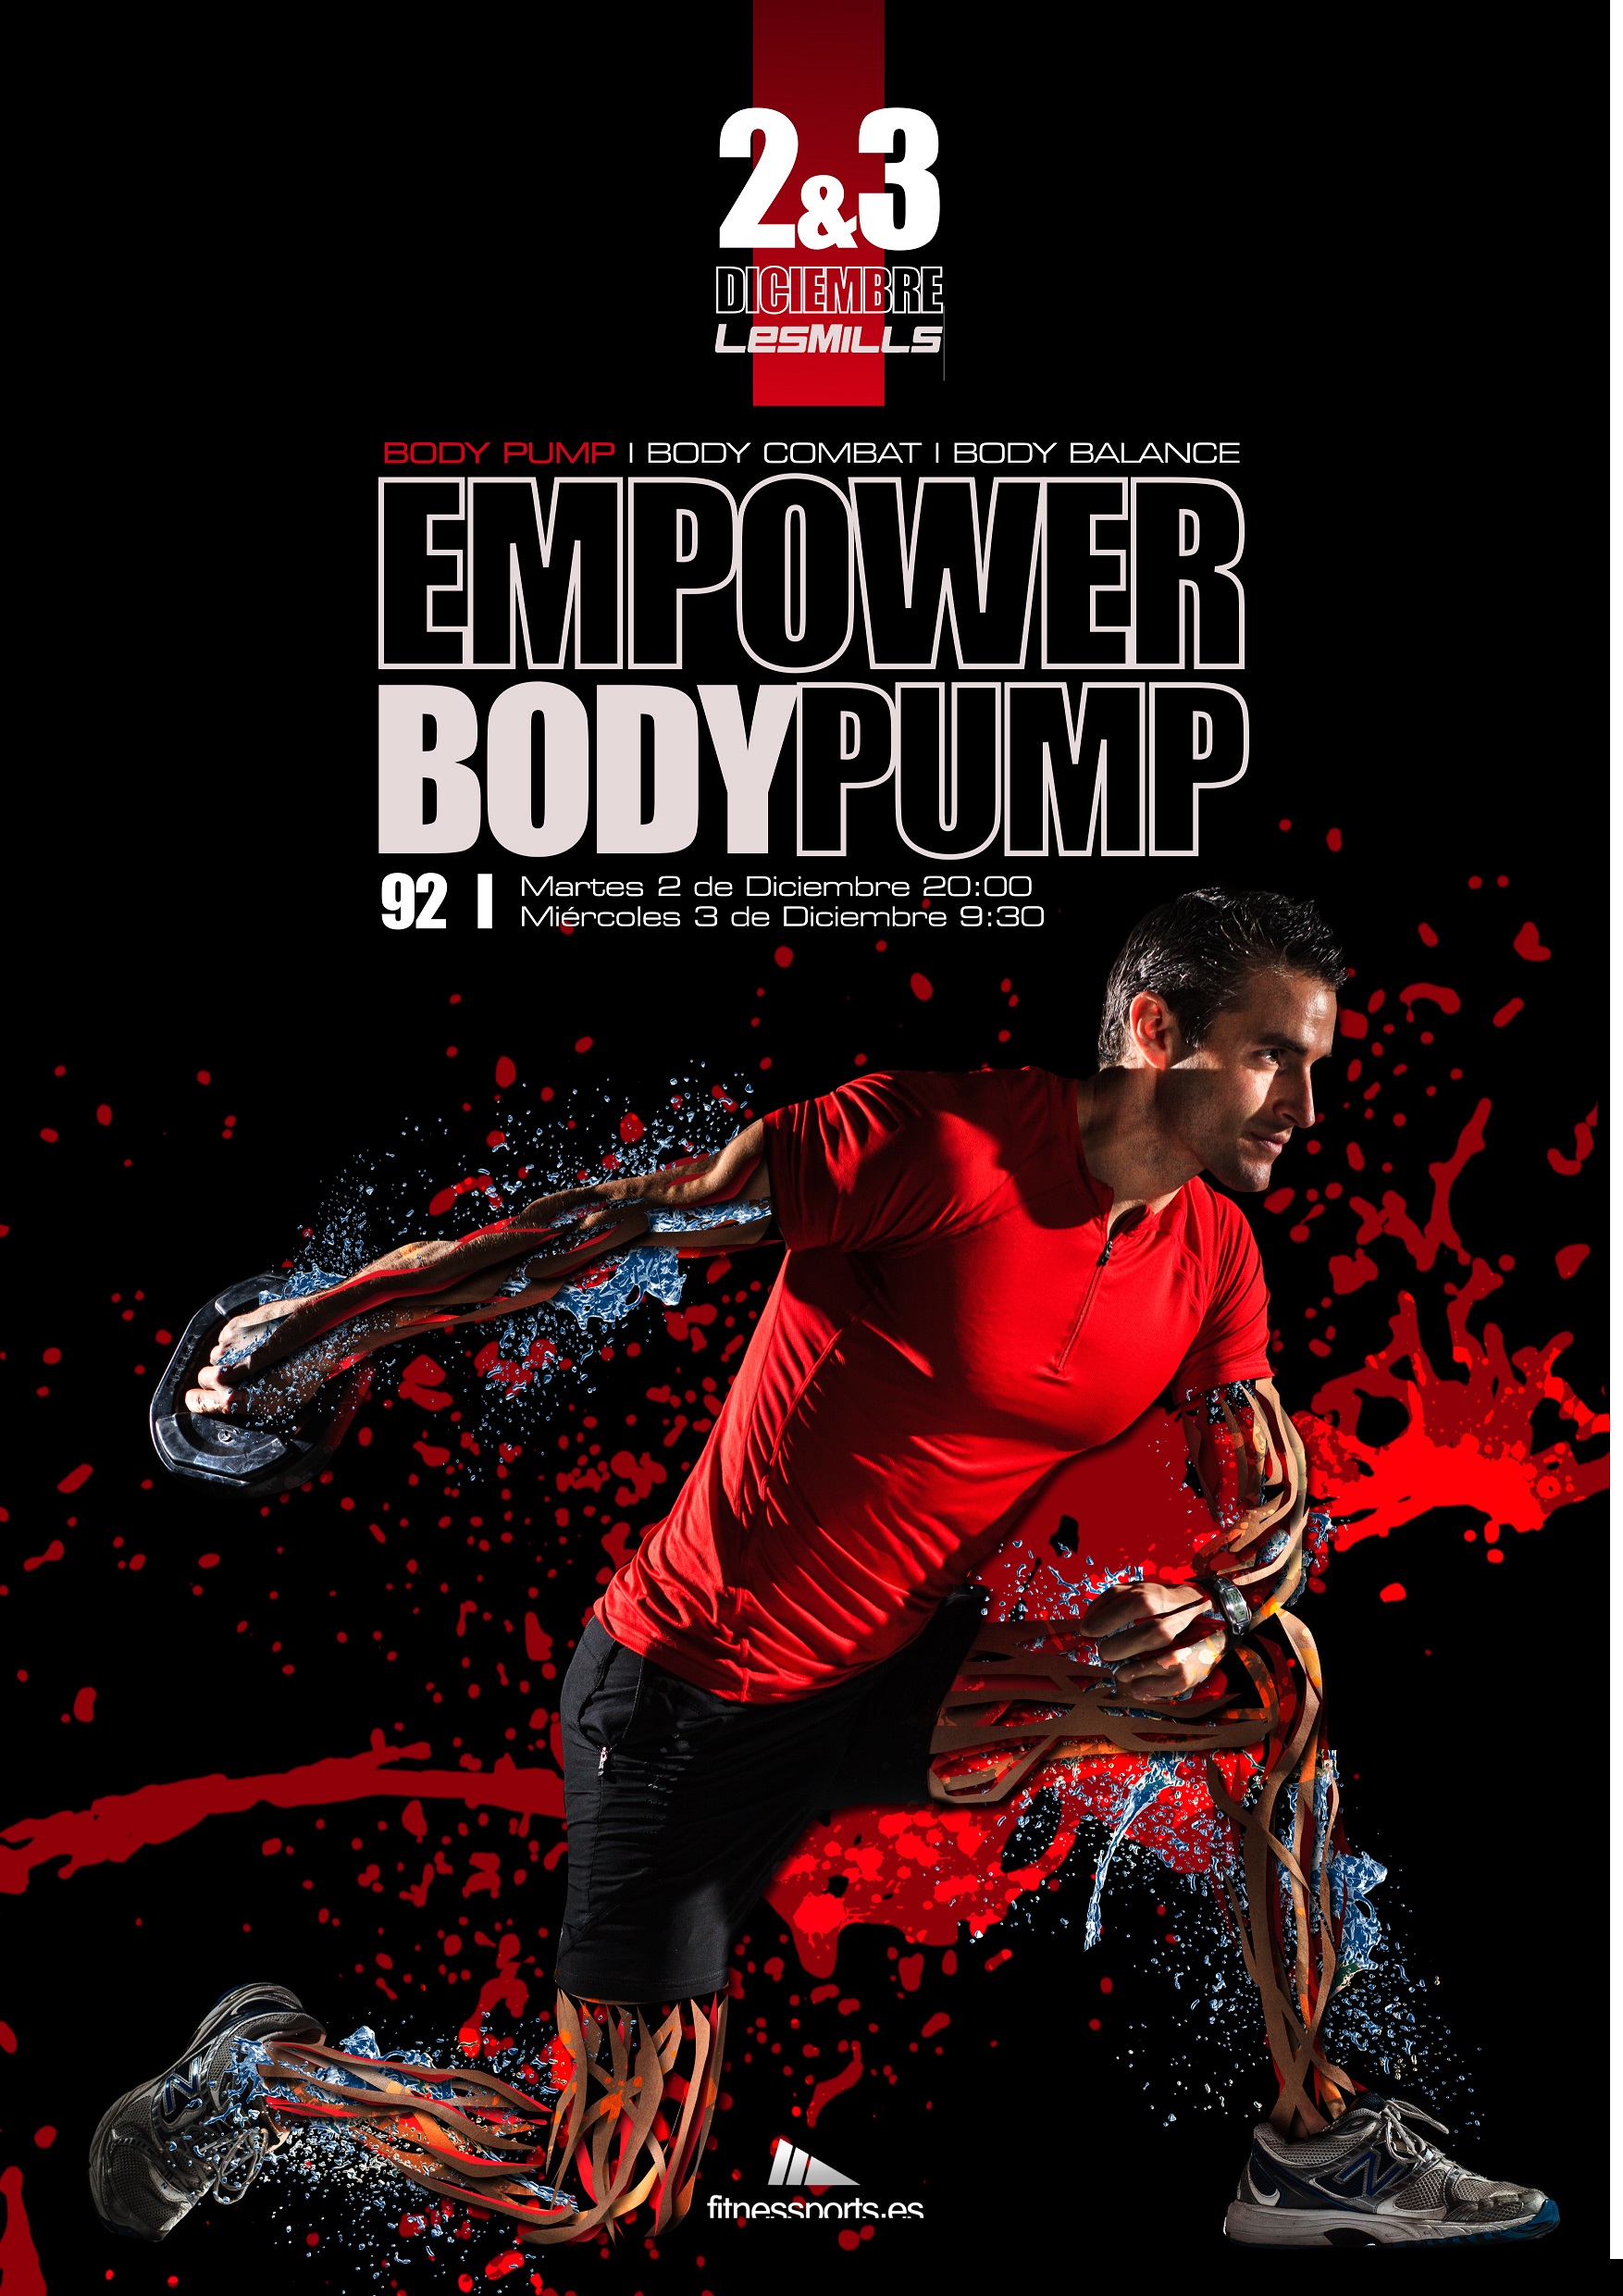 https://www.perfectpixel.es/wp-content/uploads/2014/11/Body-pump-92-New-Release-Les-Mills-Fitness-Sports-Valle-las-Ca%C3%B1as-by-PerfectPixel-Publicidad-Advertisement-LowRes2.jpg